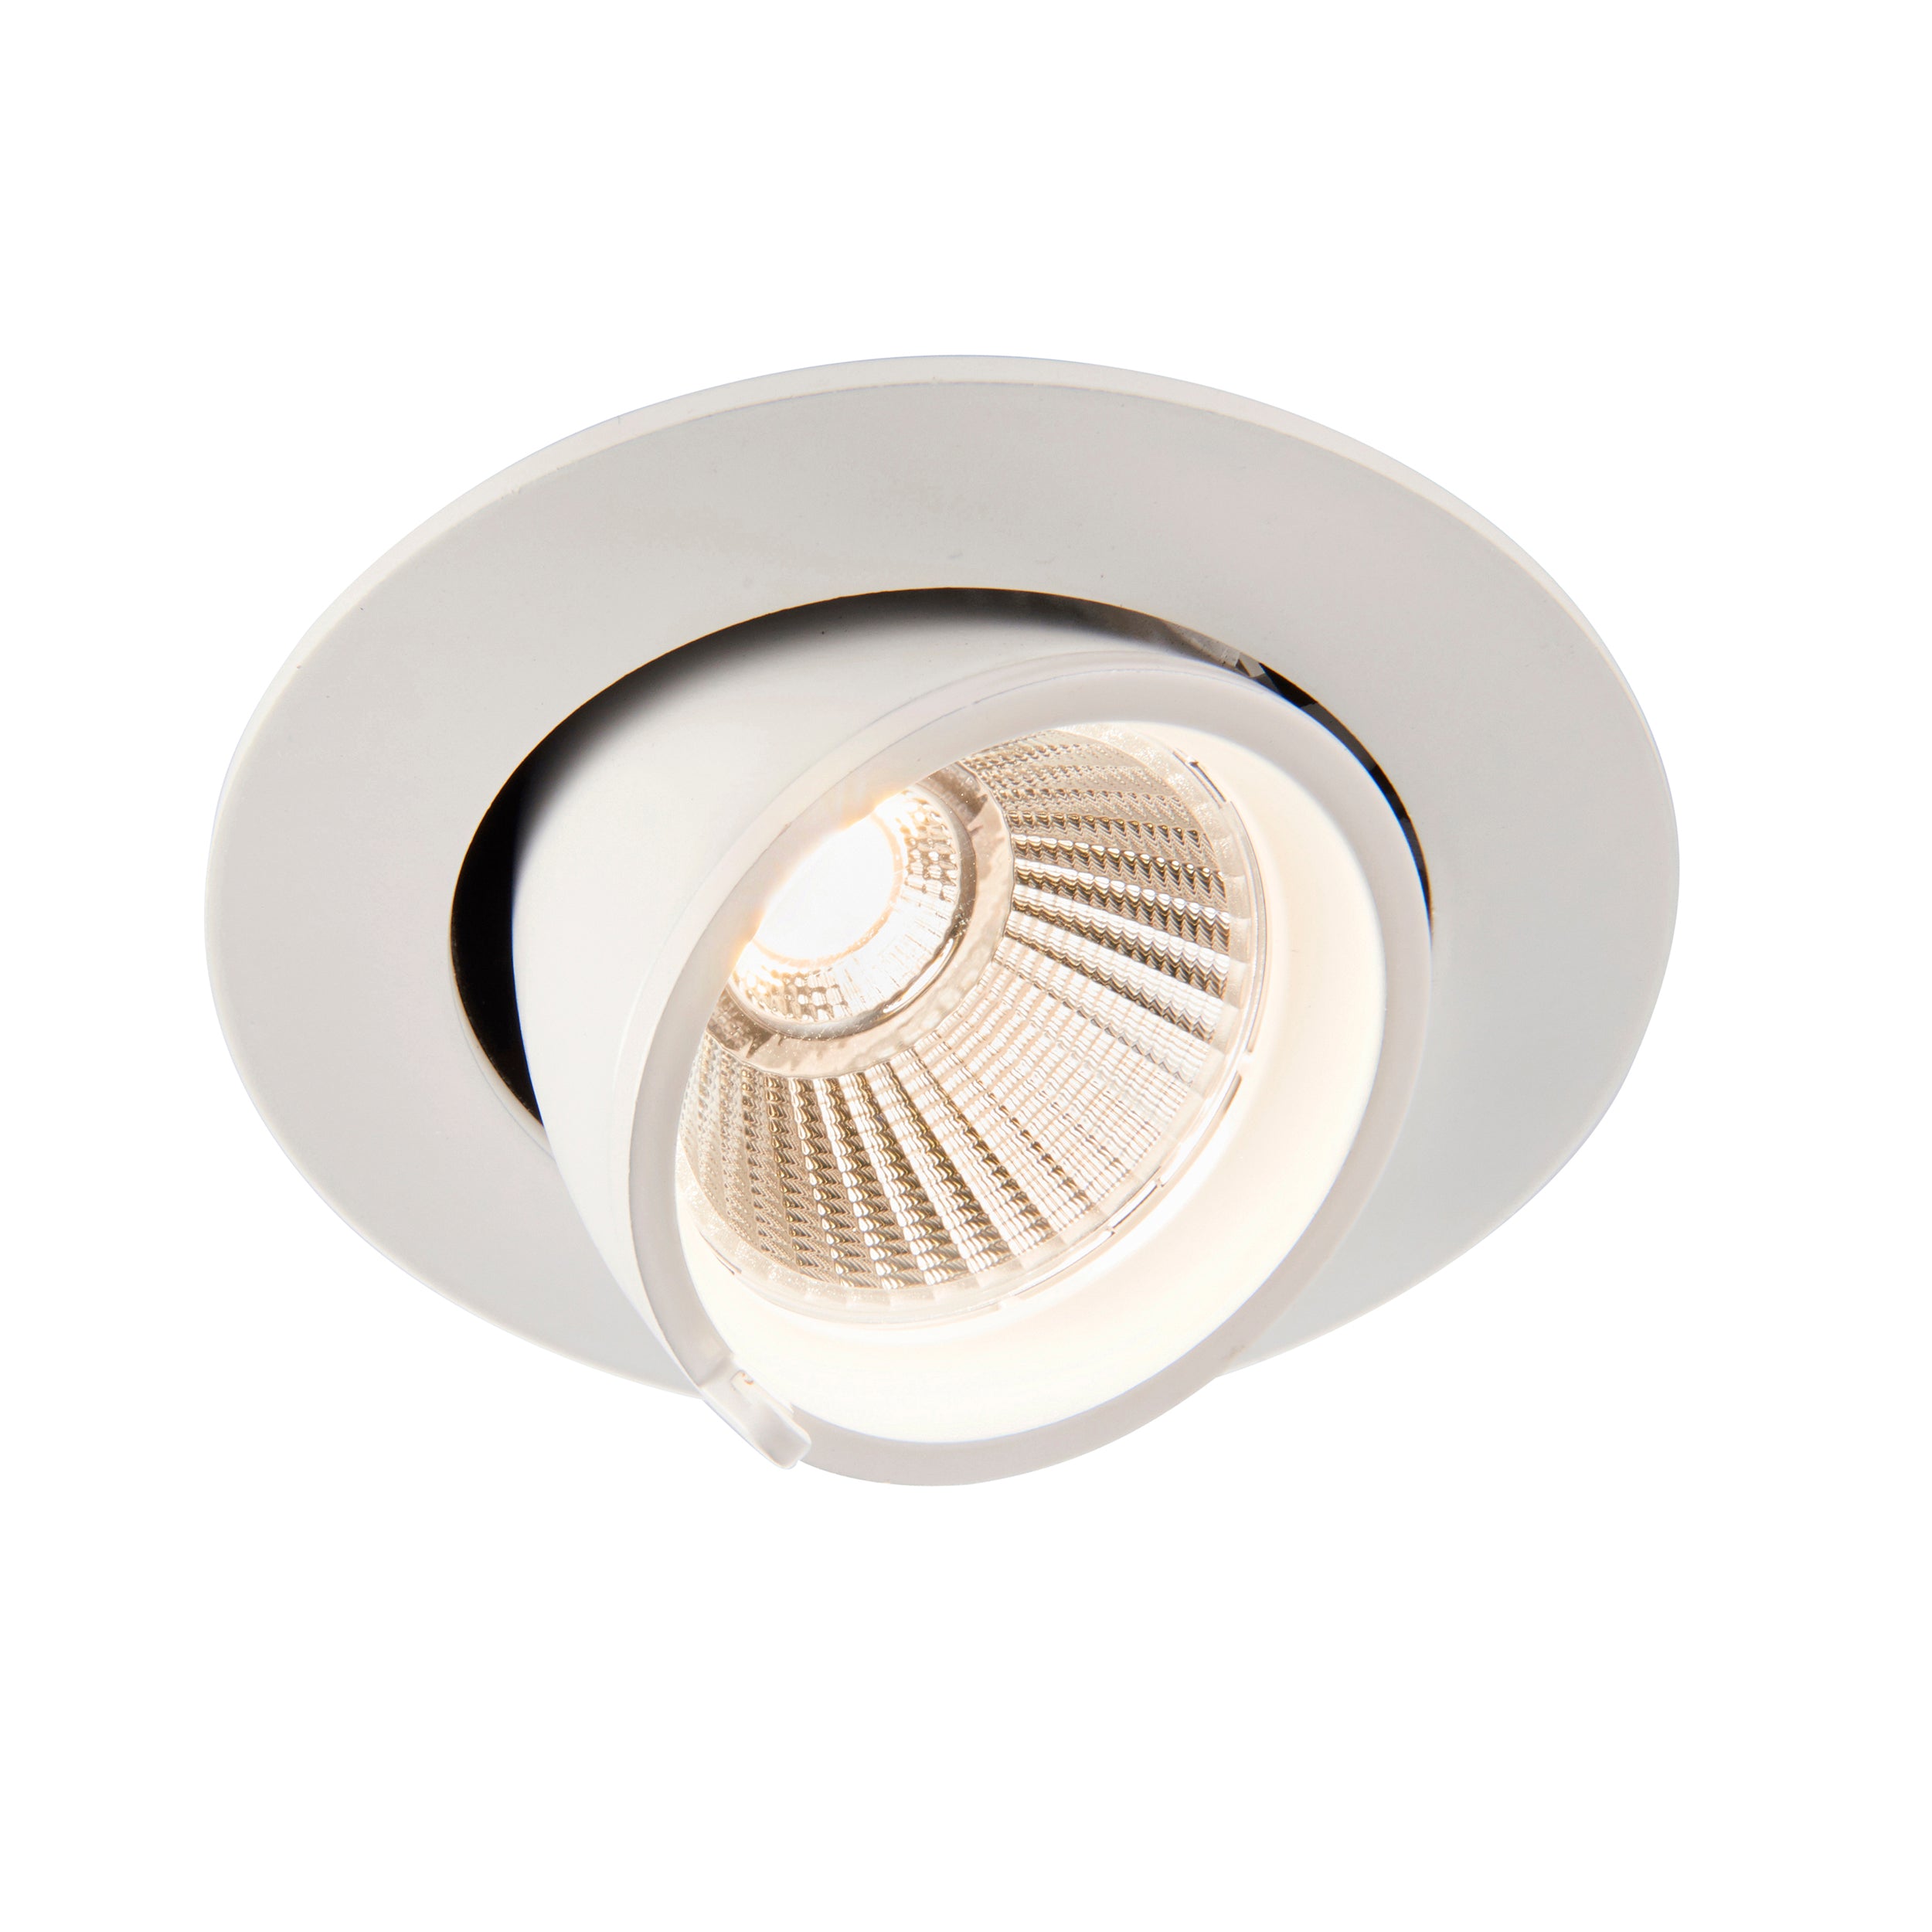 Axial Round 9W LED Recessed Matt White 3000K IP20 750Lm